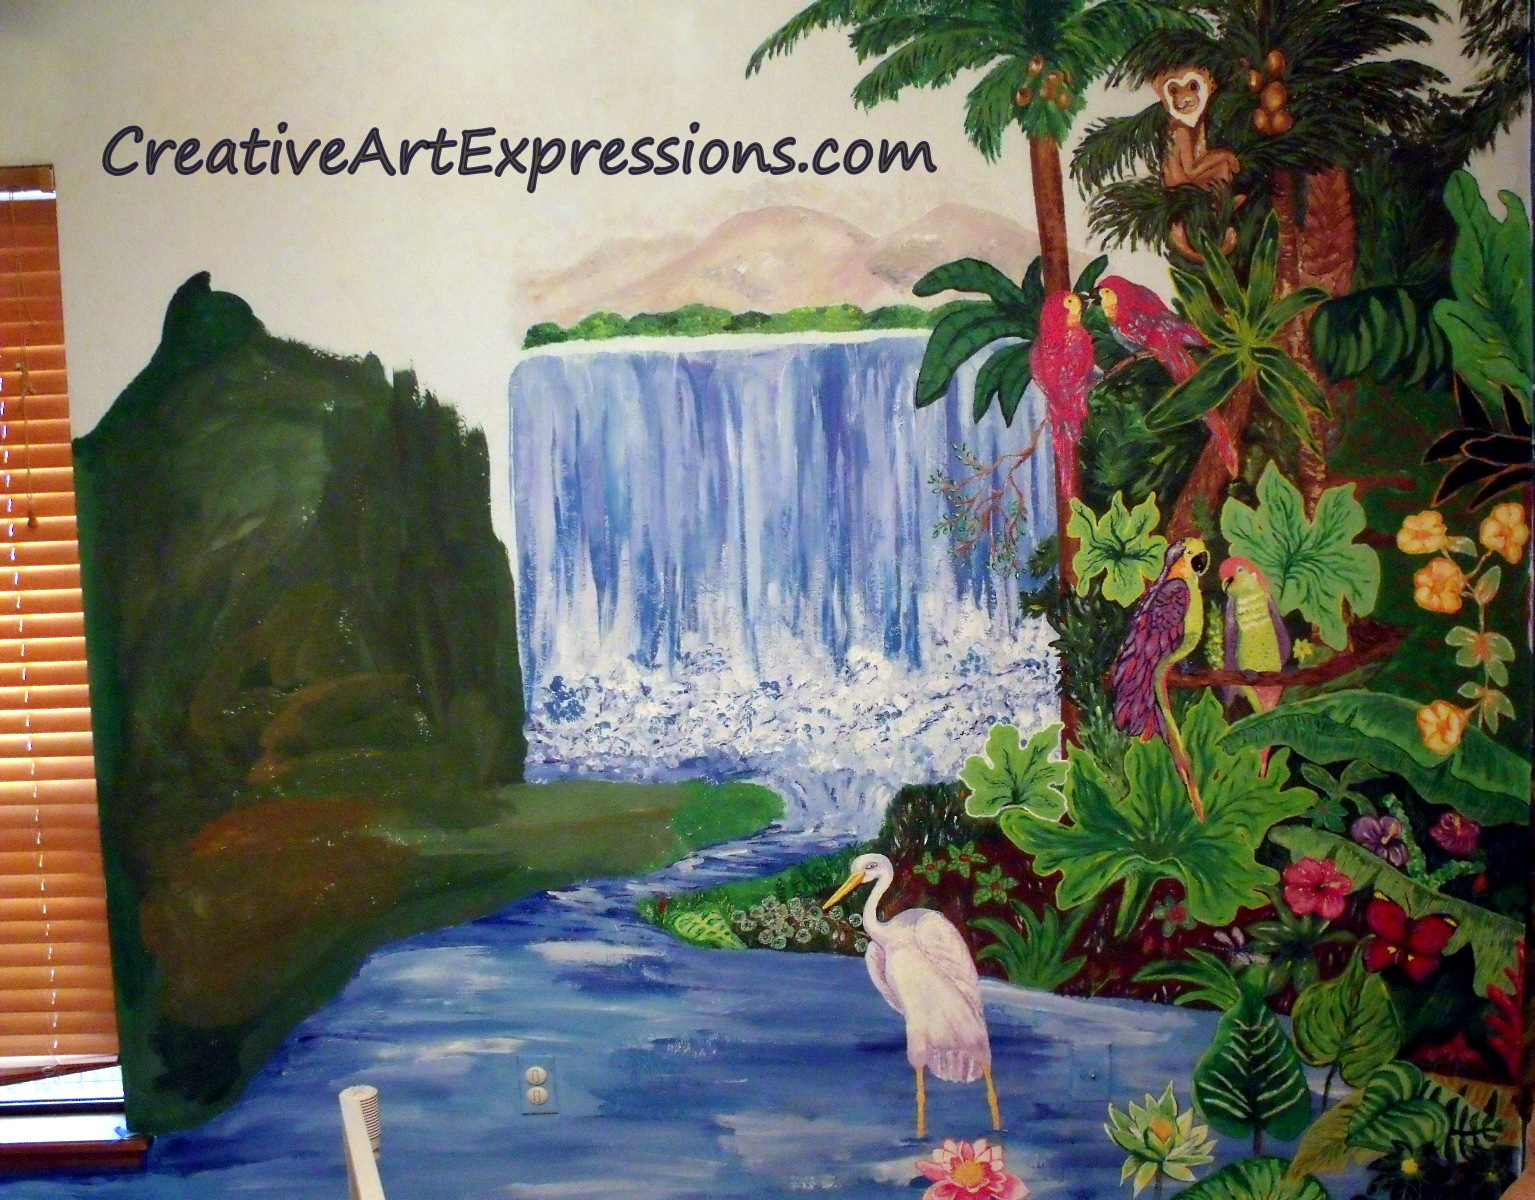 Creative Art Expressions Hand Painted Rainforest Wall Mural In Progress